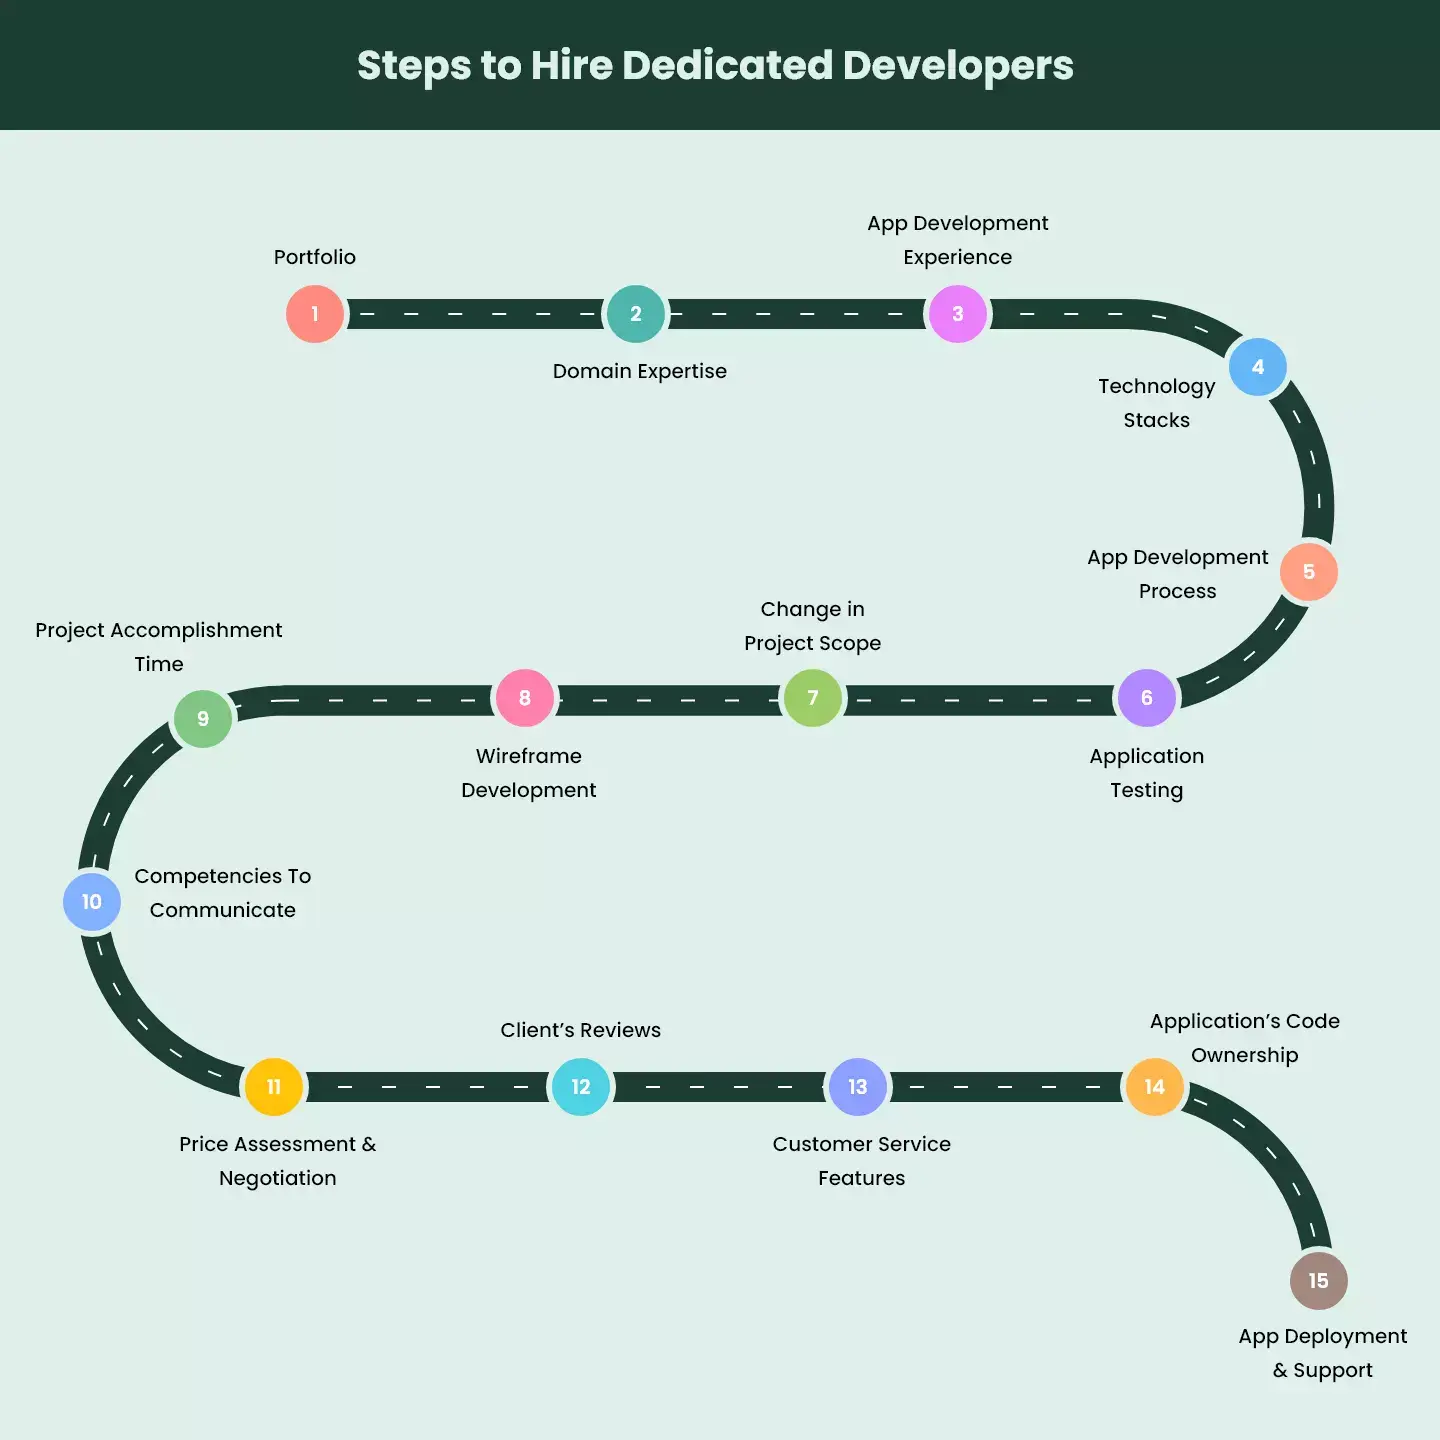 Steps to Hire Dedicated Developers